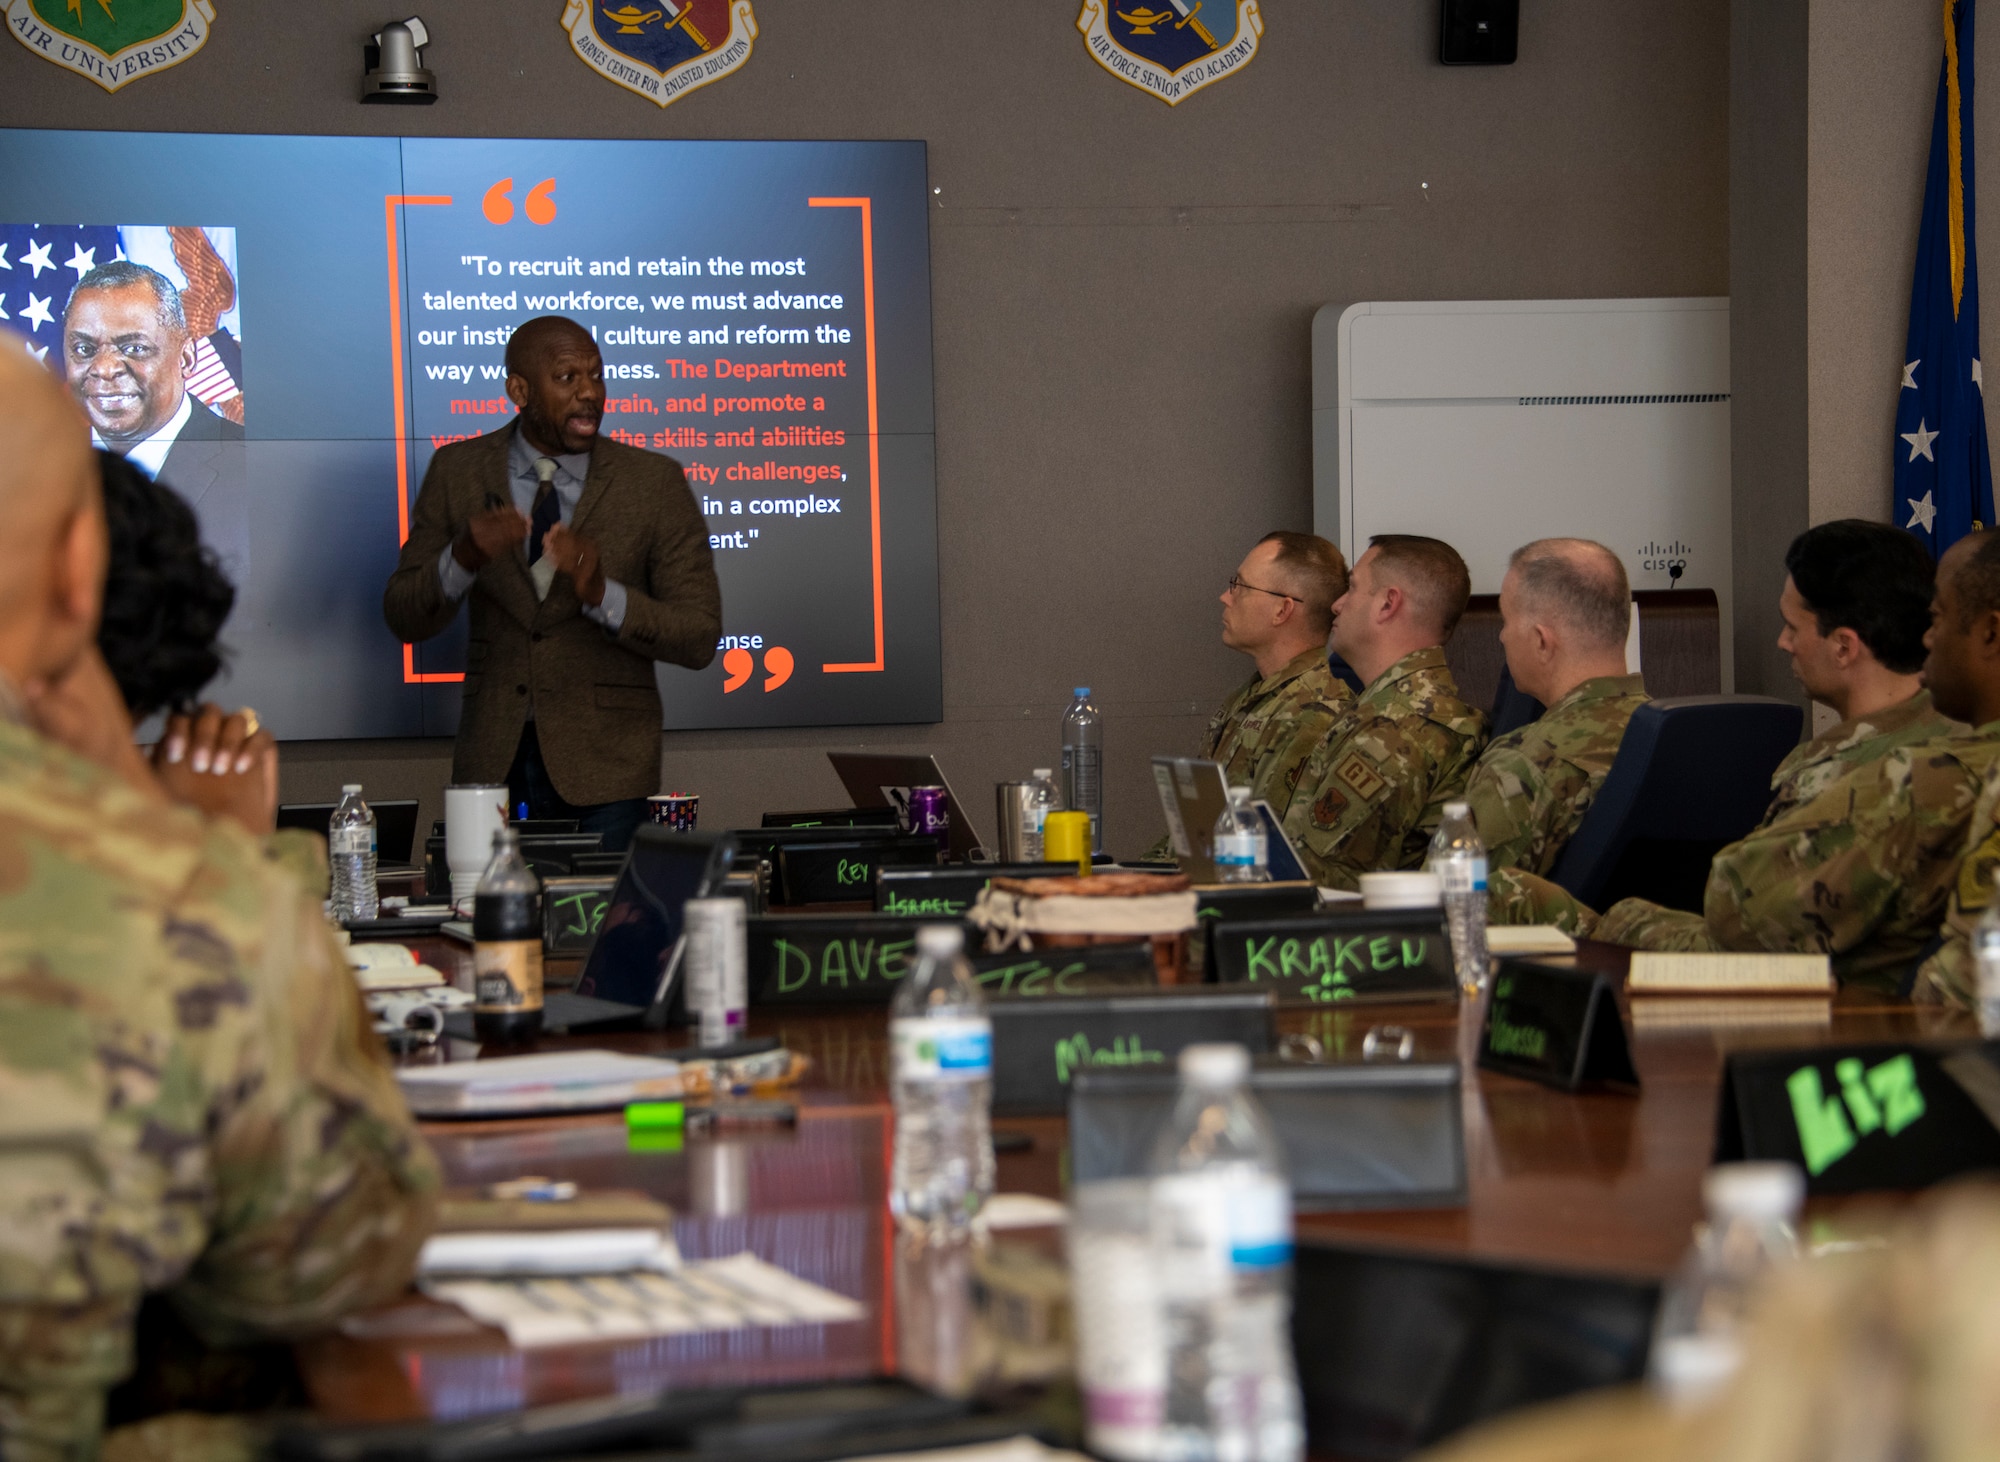 Chief Master Sgt. (Ret.) Todd M. Simmons speaks to the inaugural Chief Master Sergeant Leadership Academy’s Senior Leaders Course about strategic leader perspectives at Maxwell Air Force Base – Gunter Annex, Ala., March 23, 2023. Simmons is the former Command Chief Master Sergeant of Air University. (U.S. Air Force photo/Brian Ferguson)